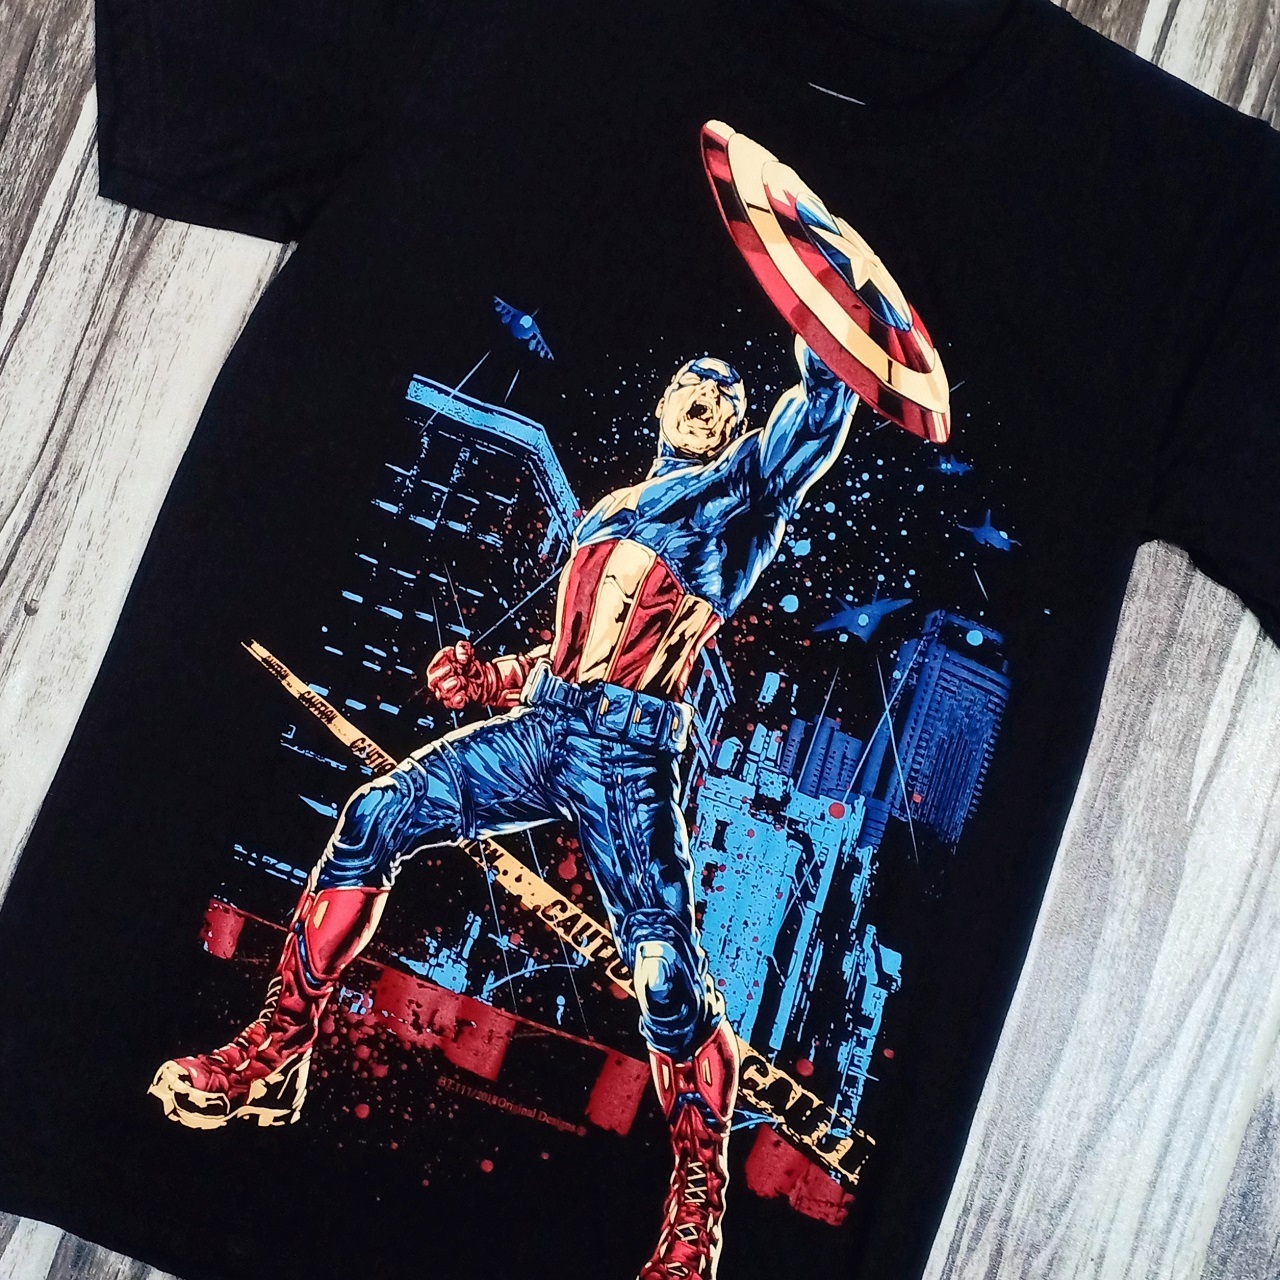 BT111 CAPTAIN AMERICA STEVE ROGERS AVENGERS MARVEL HERO MOVIE EDITION BLACK  TIMBER COLLECTABLE COTTON TSHIRT – PREMIUM GRADE BLACK TIMBER NEW TYPE  SYSTEM MOAI SPEED HIGH QUALITY SILK SCREEN COLLECTABLE T-SHIRT STORE